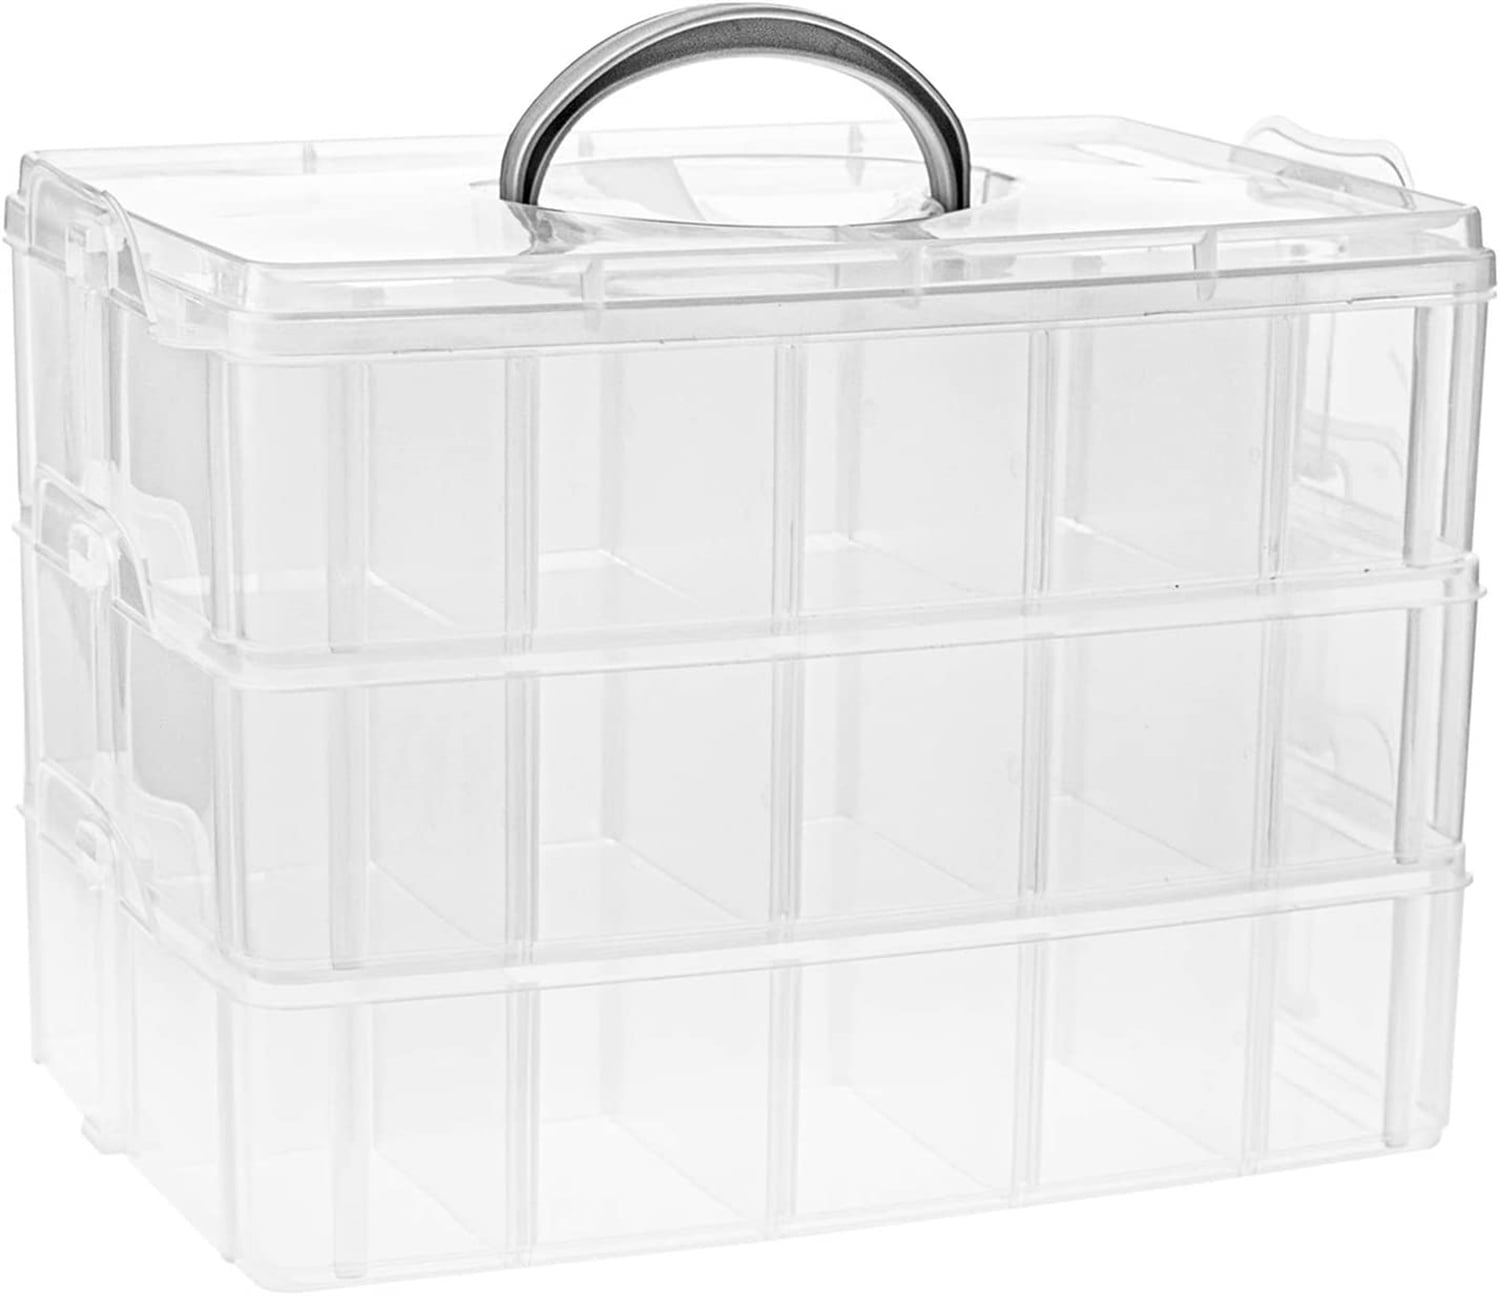 HengKe Craft Organizer Box 3 Layer Stackable Craft Storage Jewelry,Hardware,Craft Supplies Organizer with Adjustable Compartments for Accessories, Bea